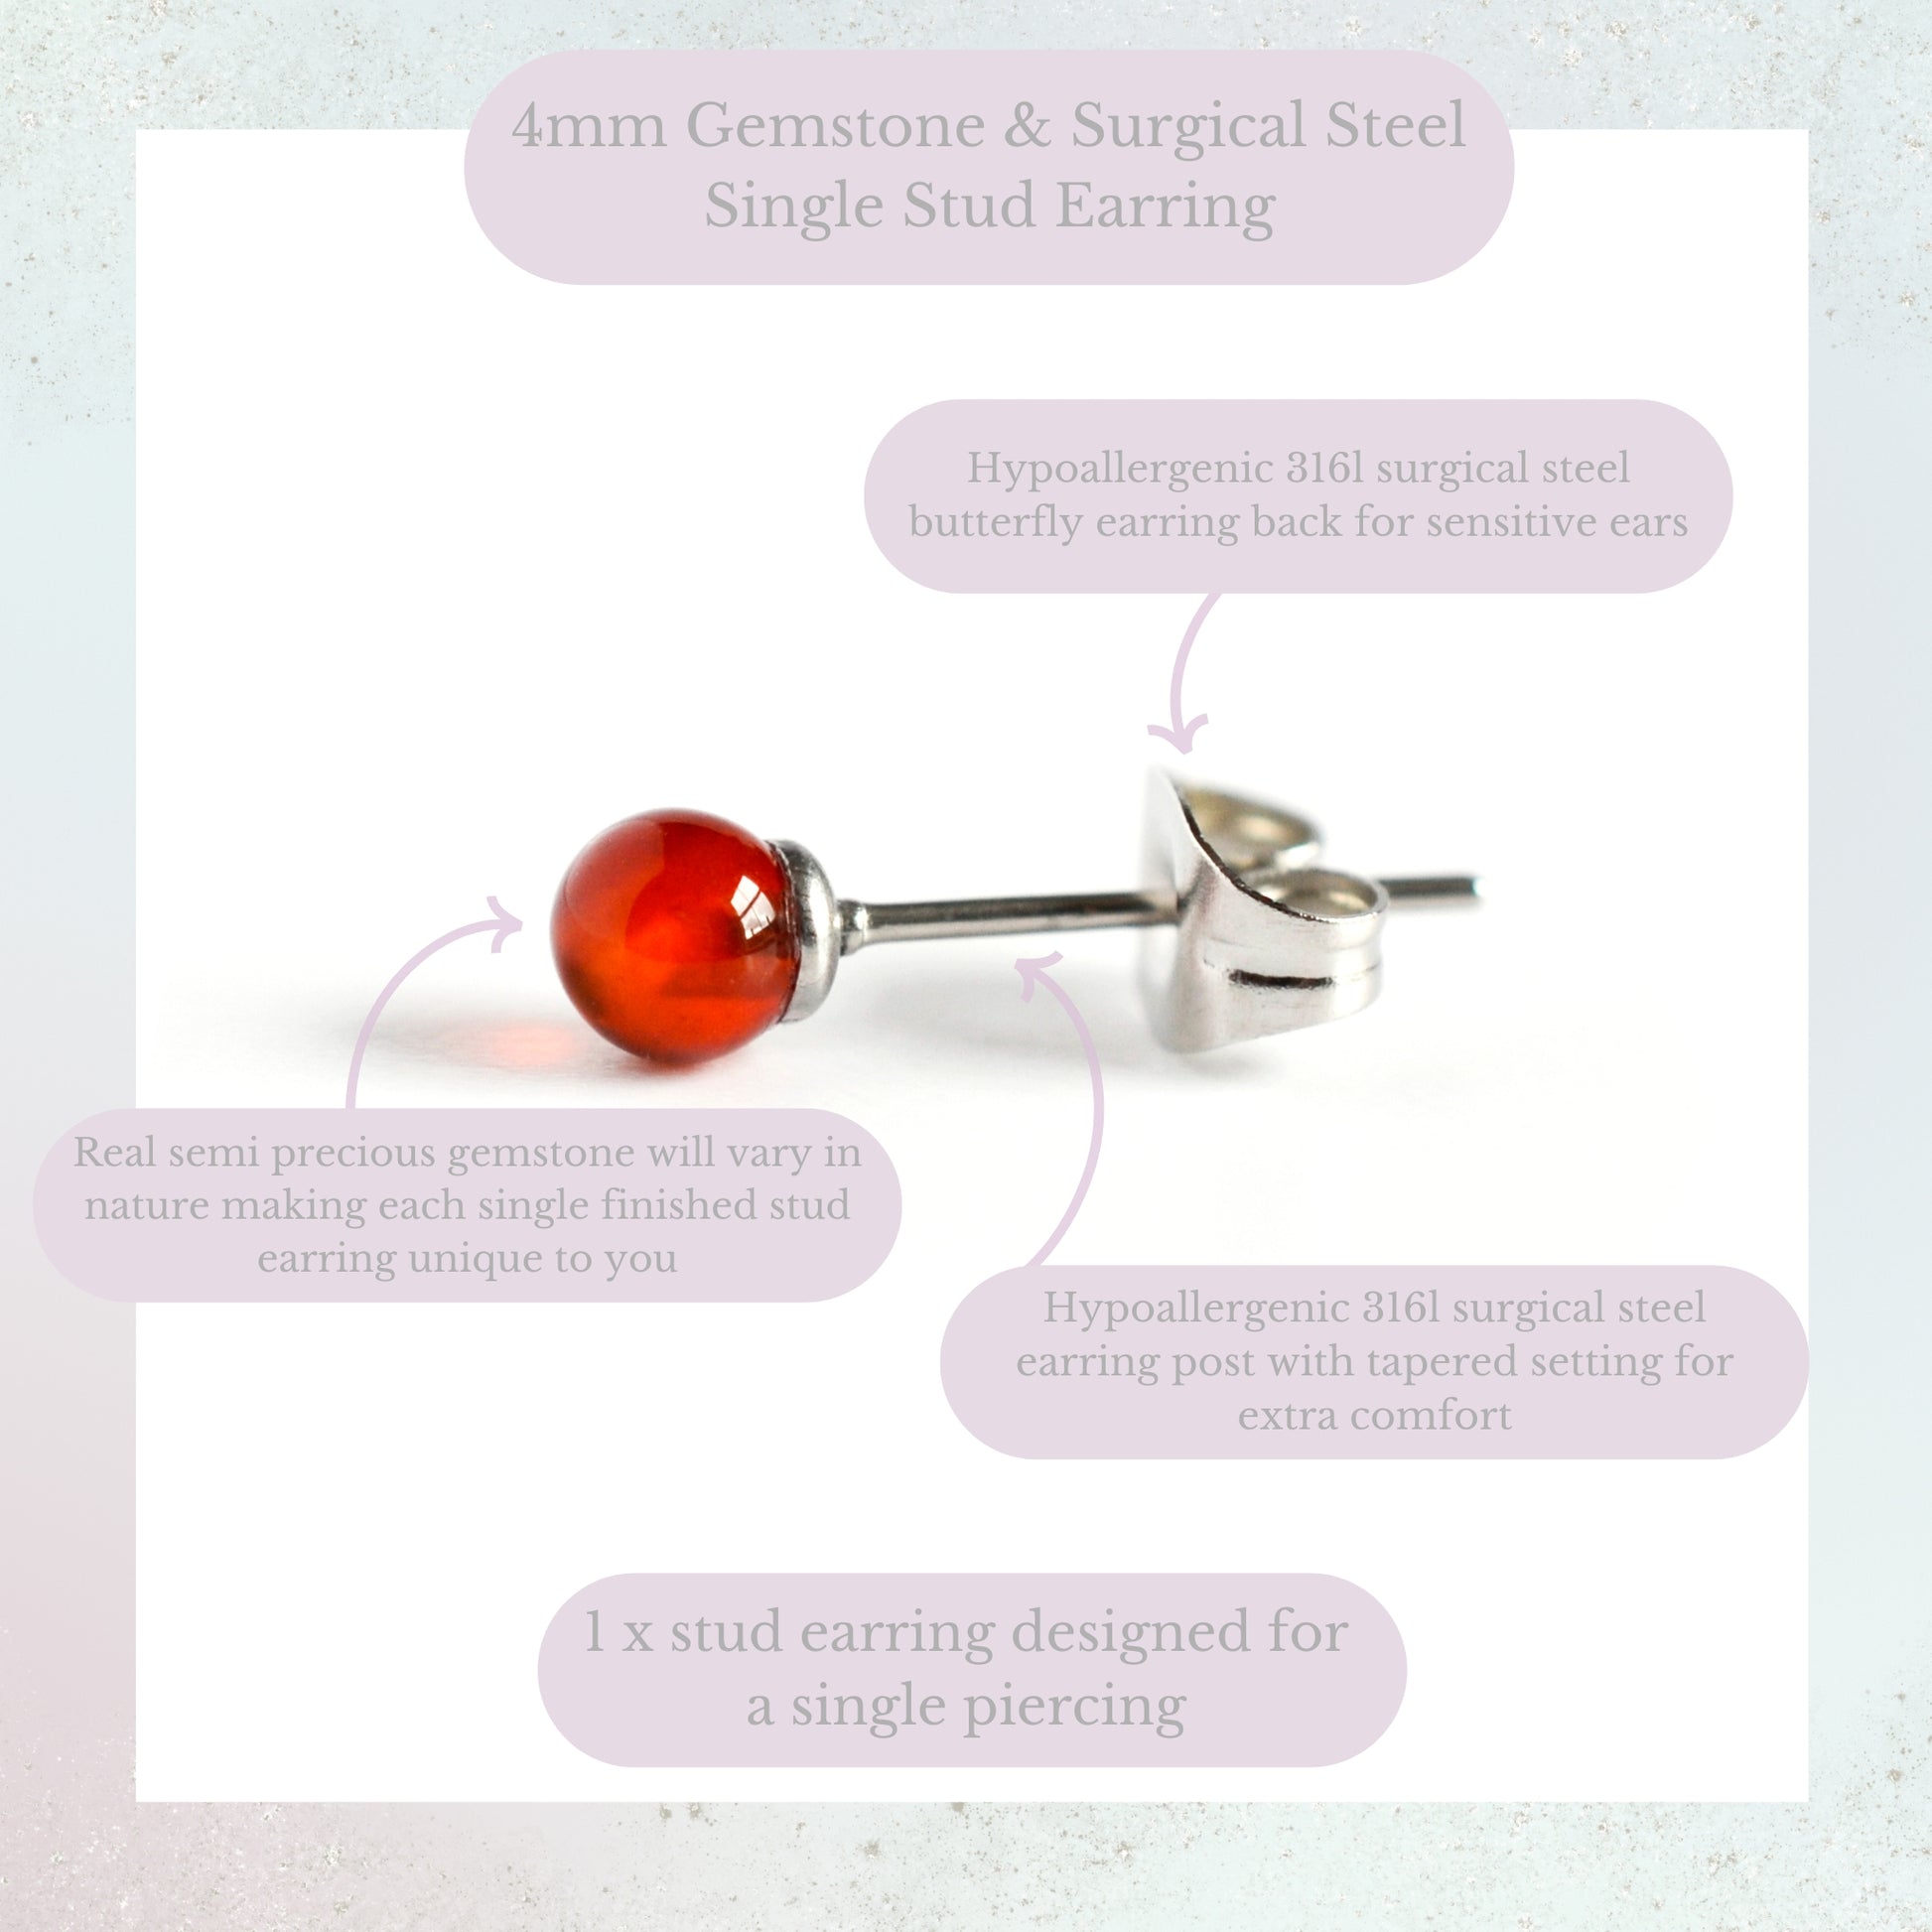 Product information graphic for 4mm gemstone & surgical steel single stud earring